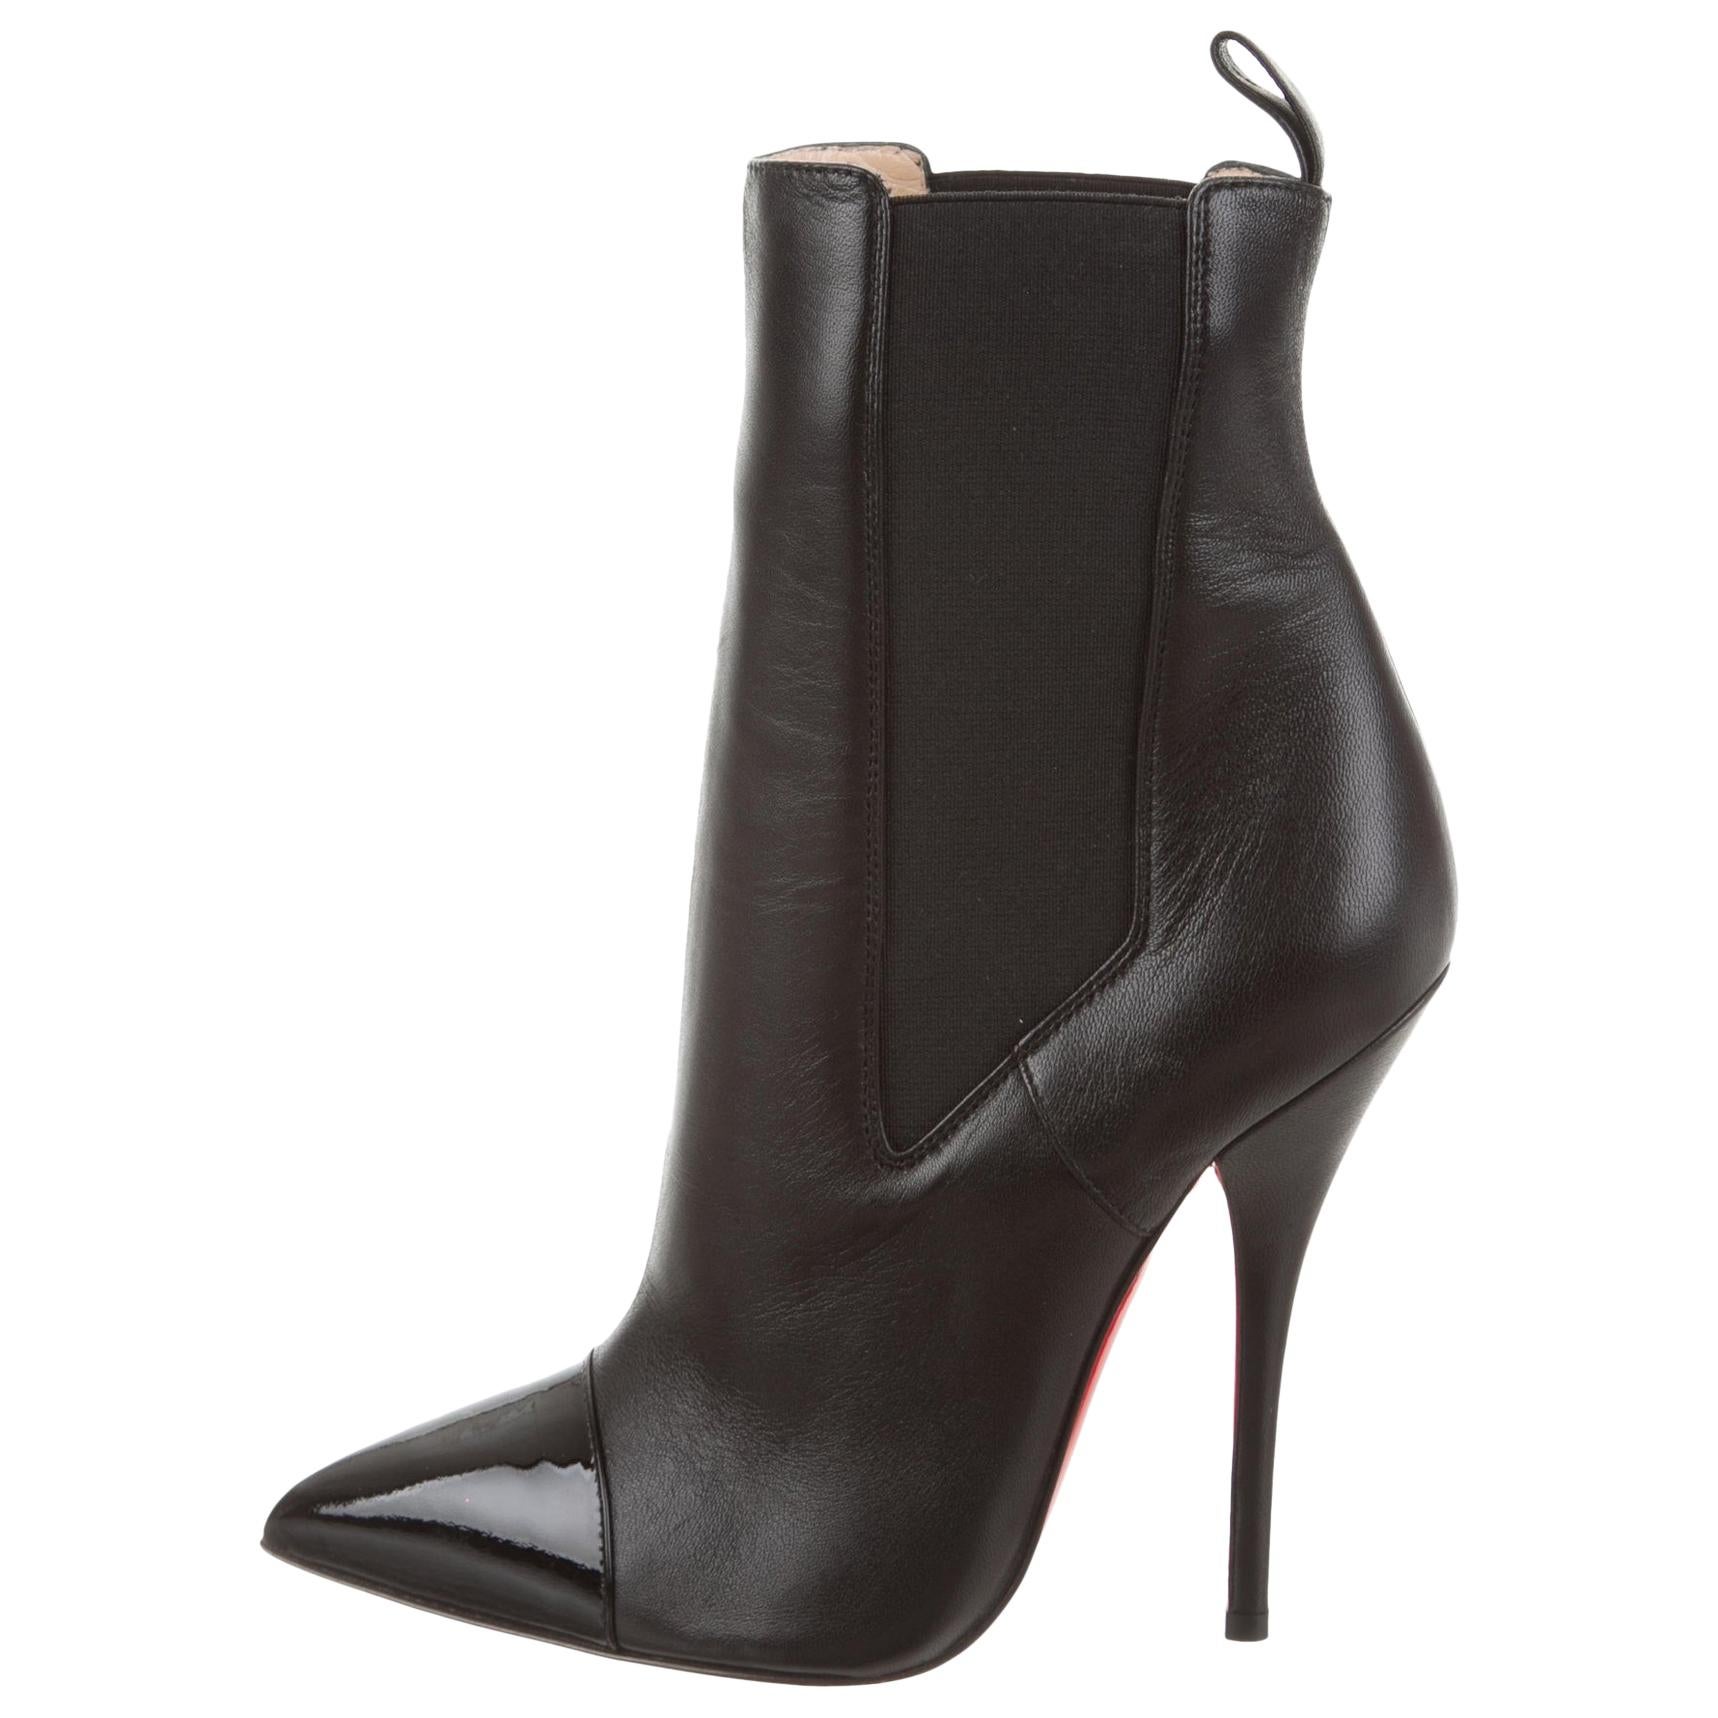 Christian Louboutin NEW Black Leather Patent Pointy Evening Ankle Boots Booties 